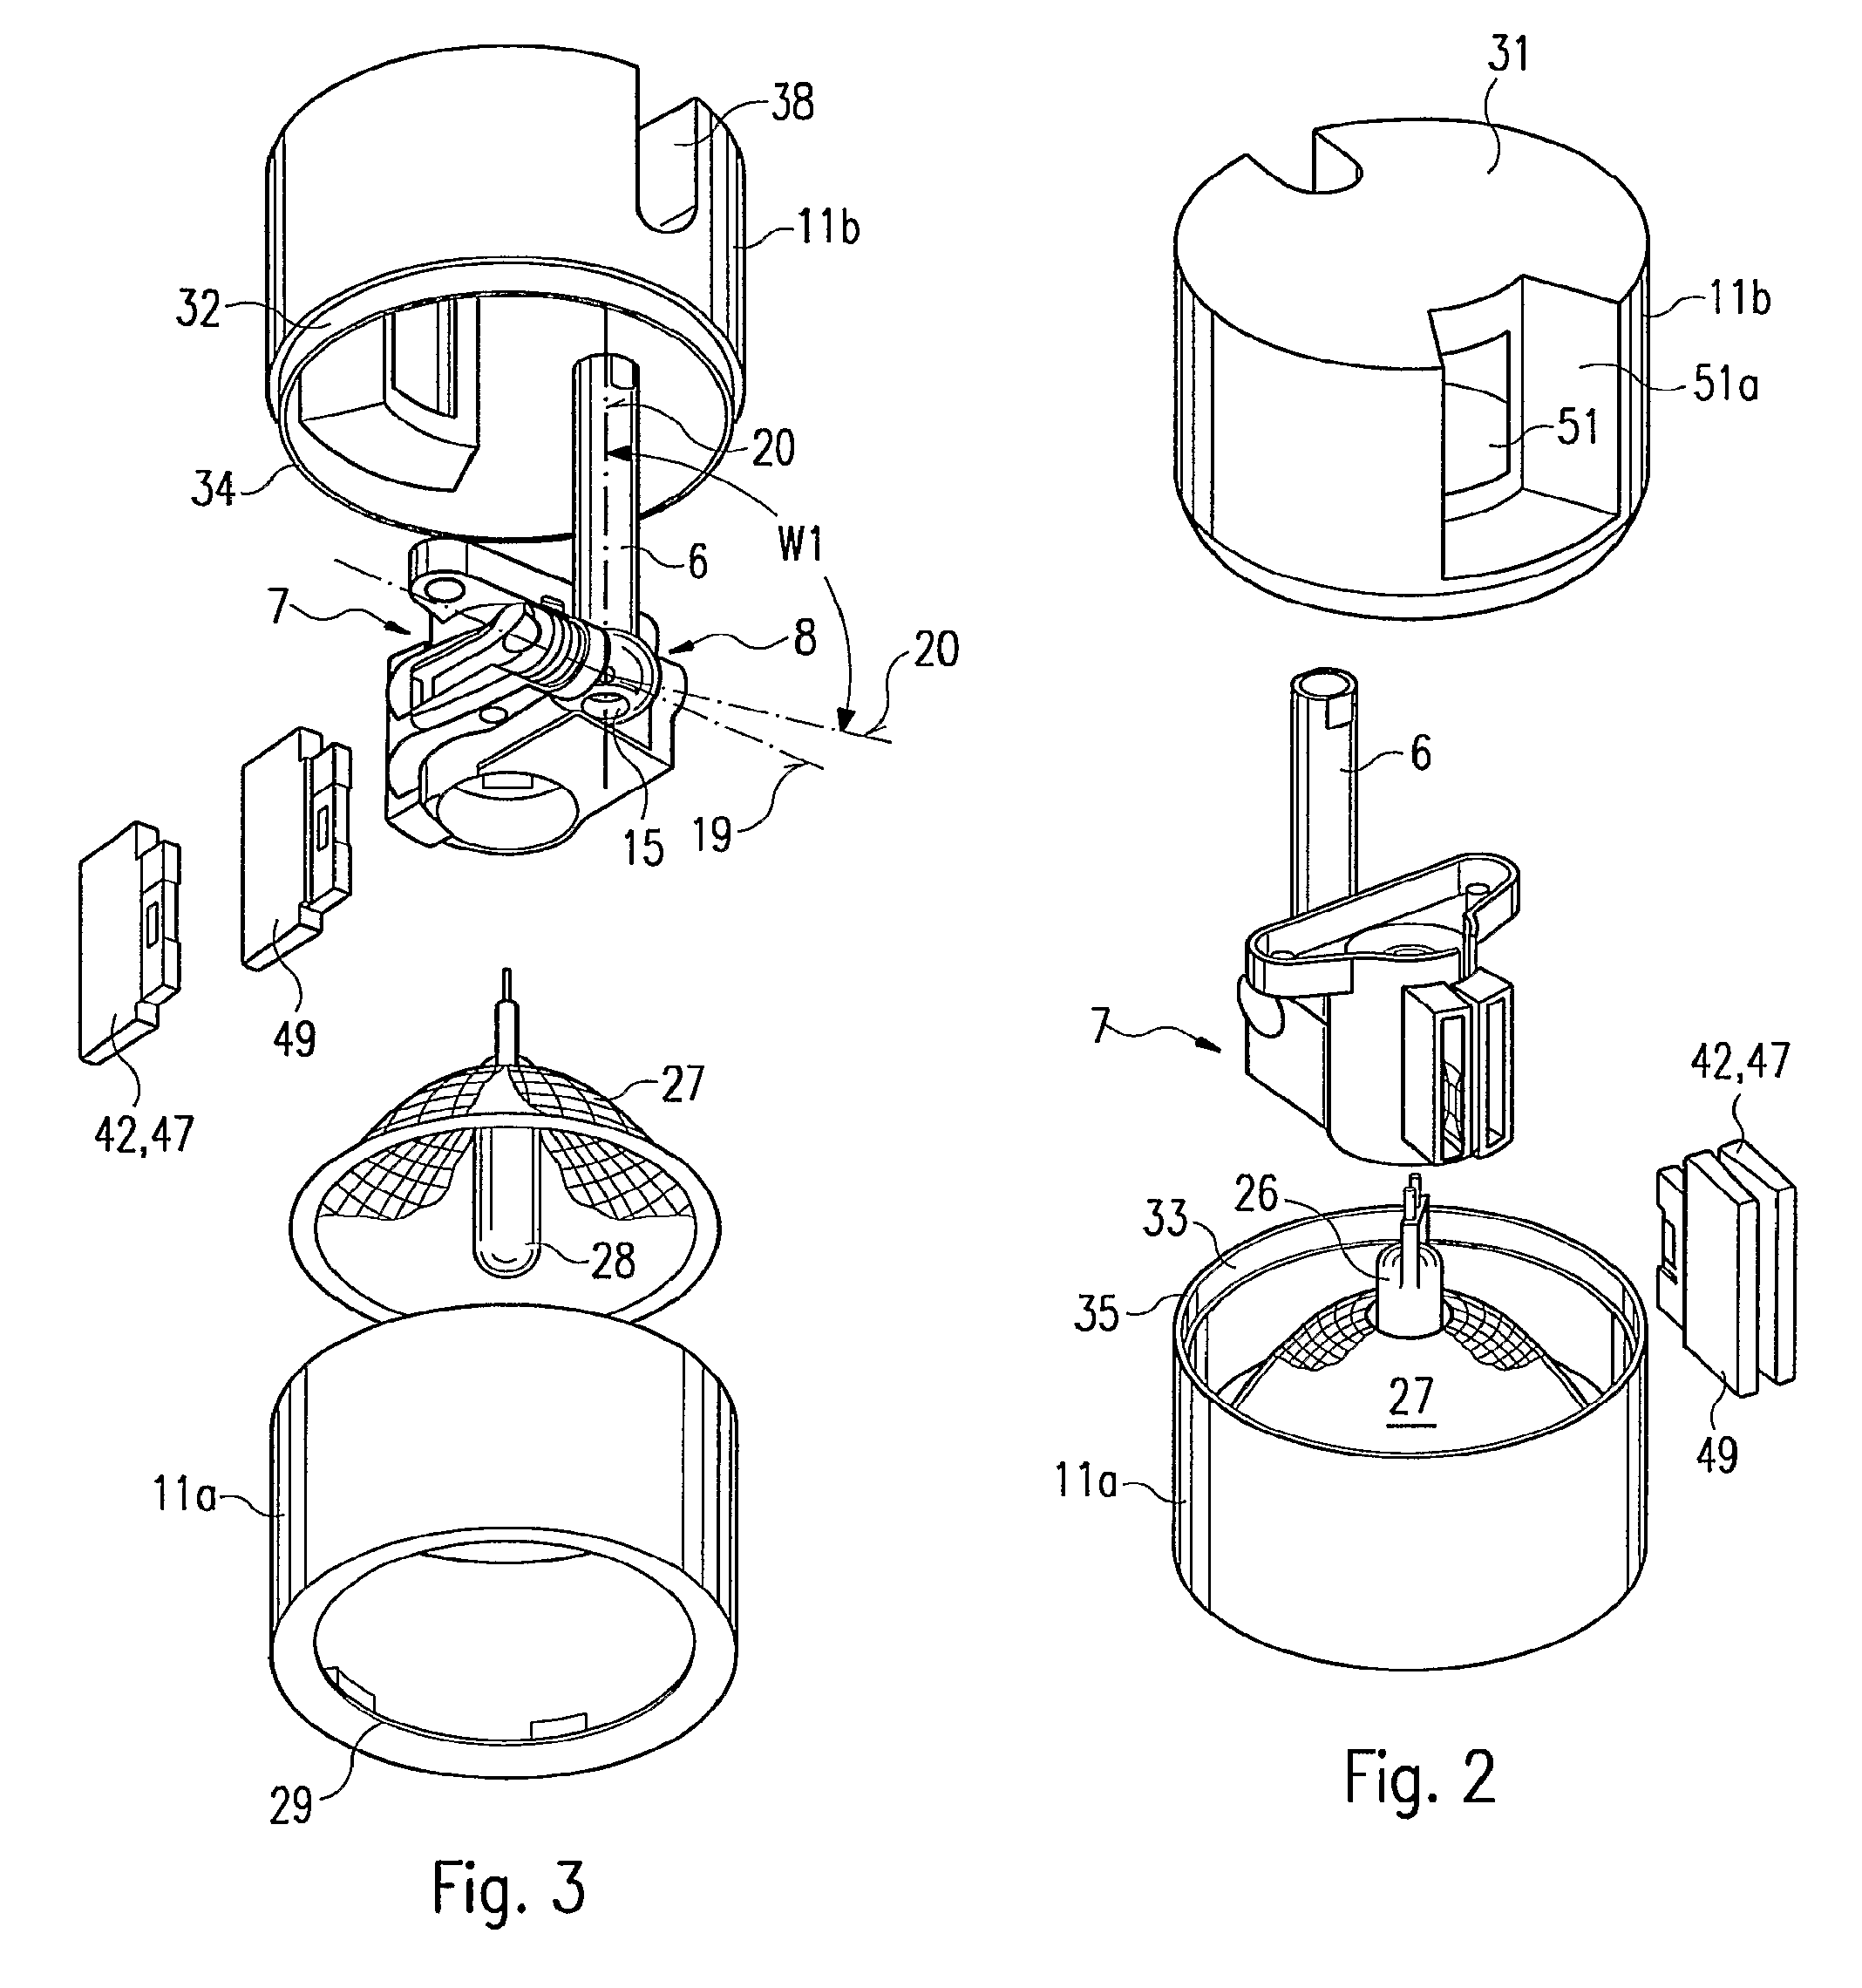 Luminaire comprising a spotlight and adjustable holding device for a spotlight